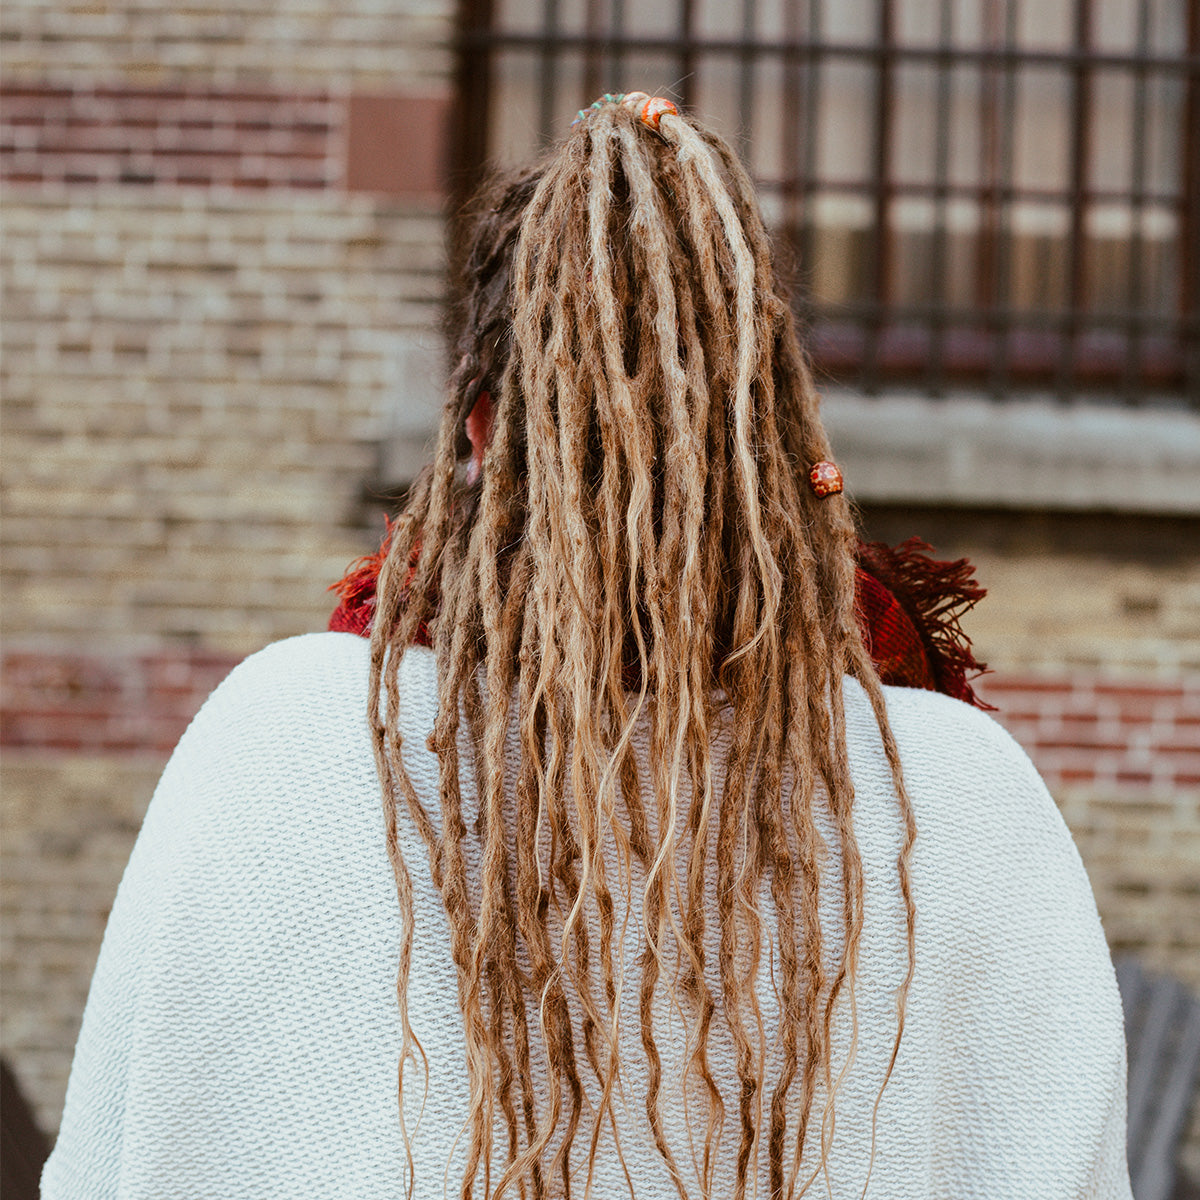 Real Dreads, when do I use which conditioning?